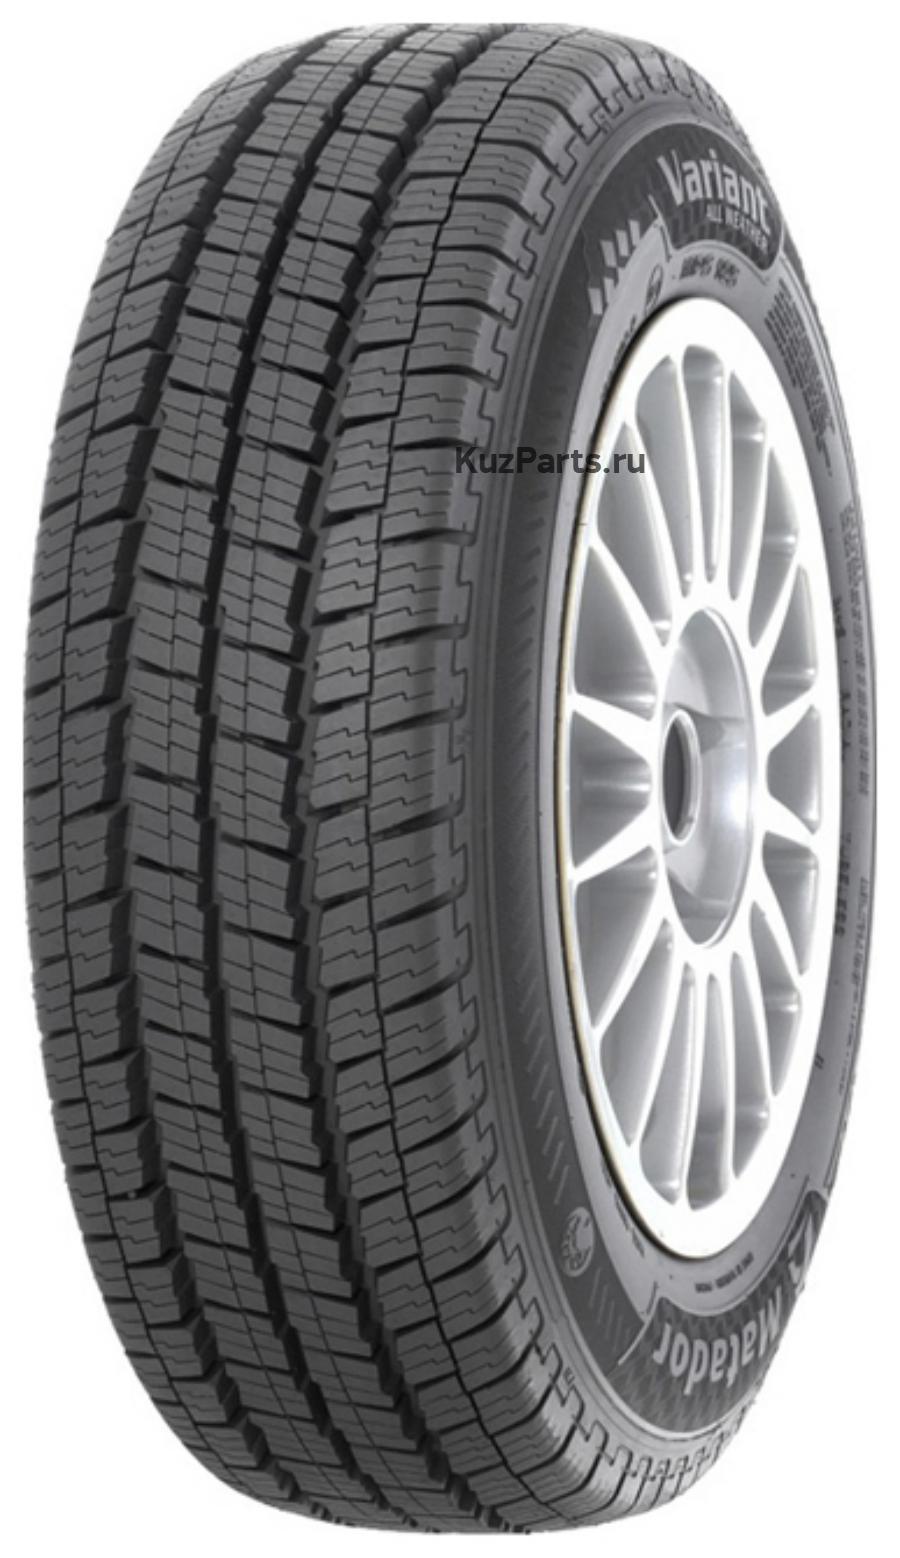 MPS 125 VARIANT ALL WEATHER 185/0R14 102